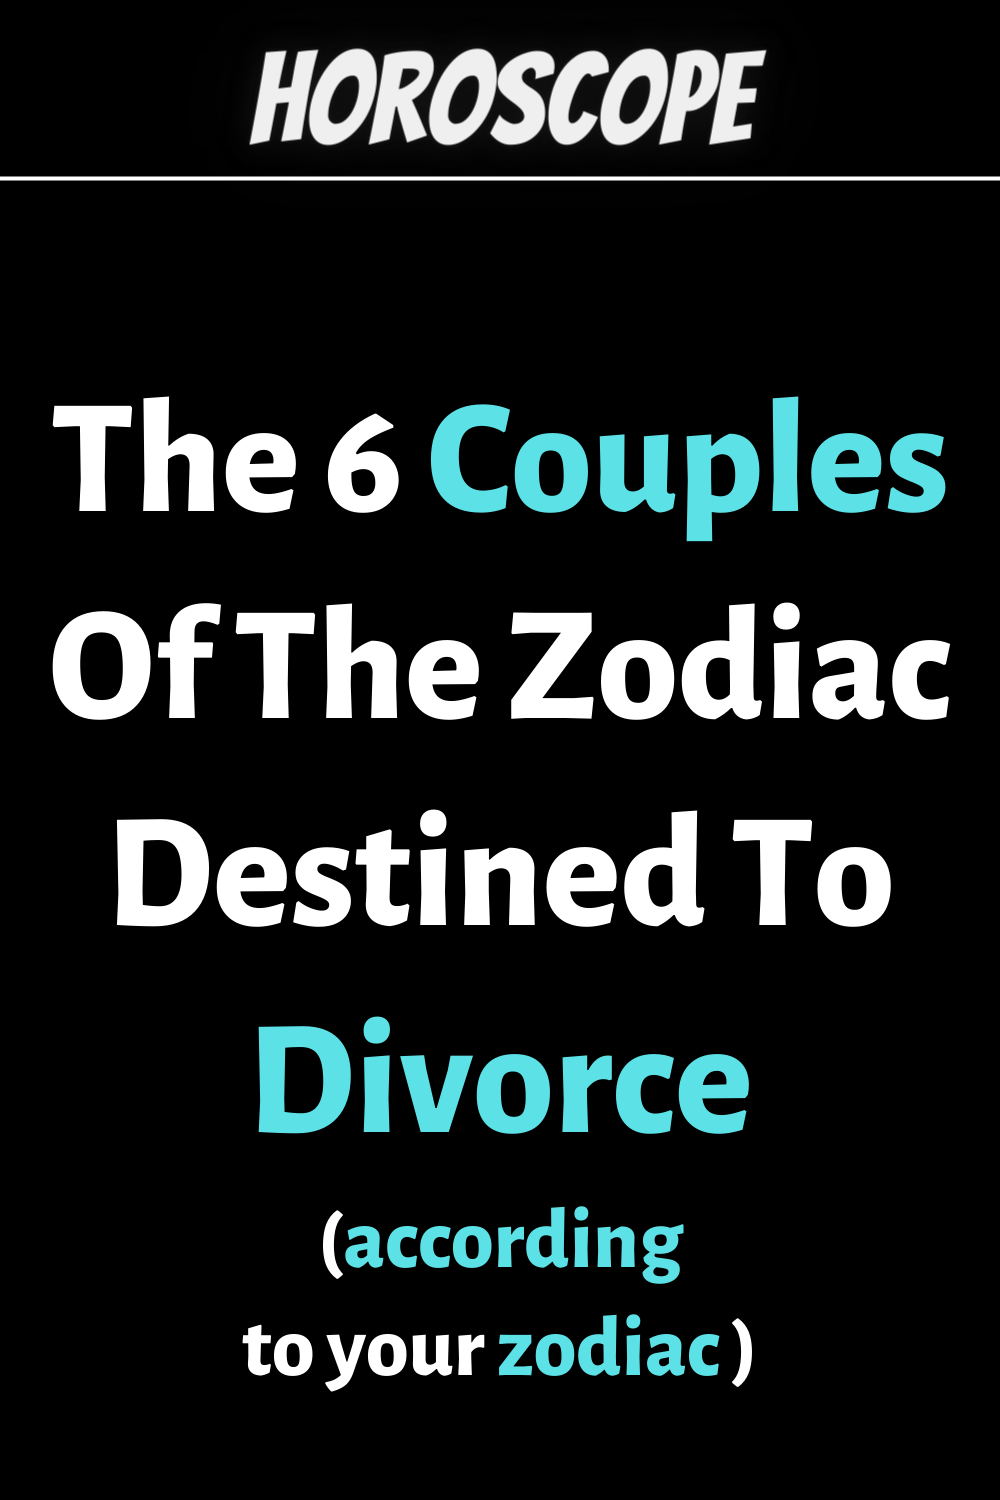 The 6 Couples Of The Zodiac Destined To Divorce